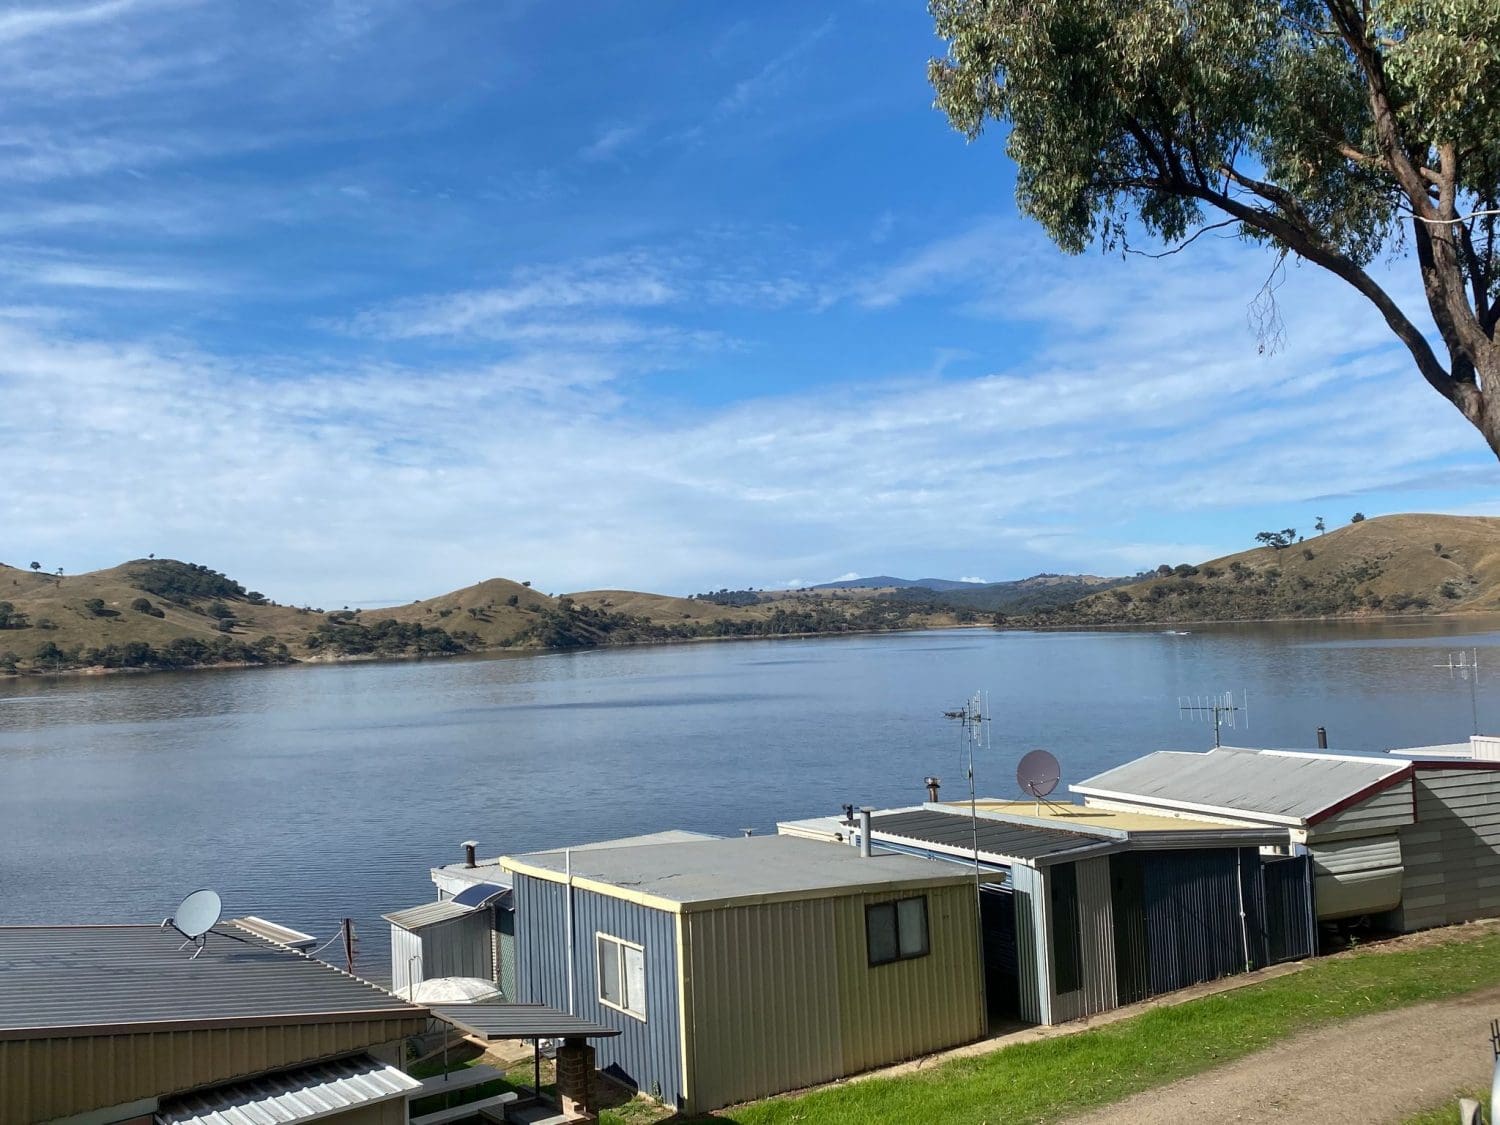 Annual Easter Fishing Competition at Woolgarlo this weekend